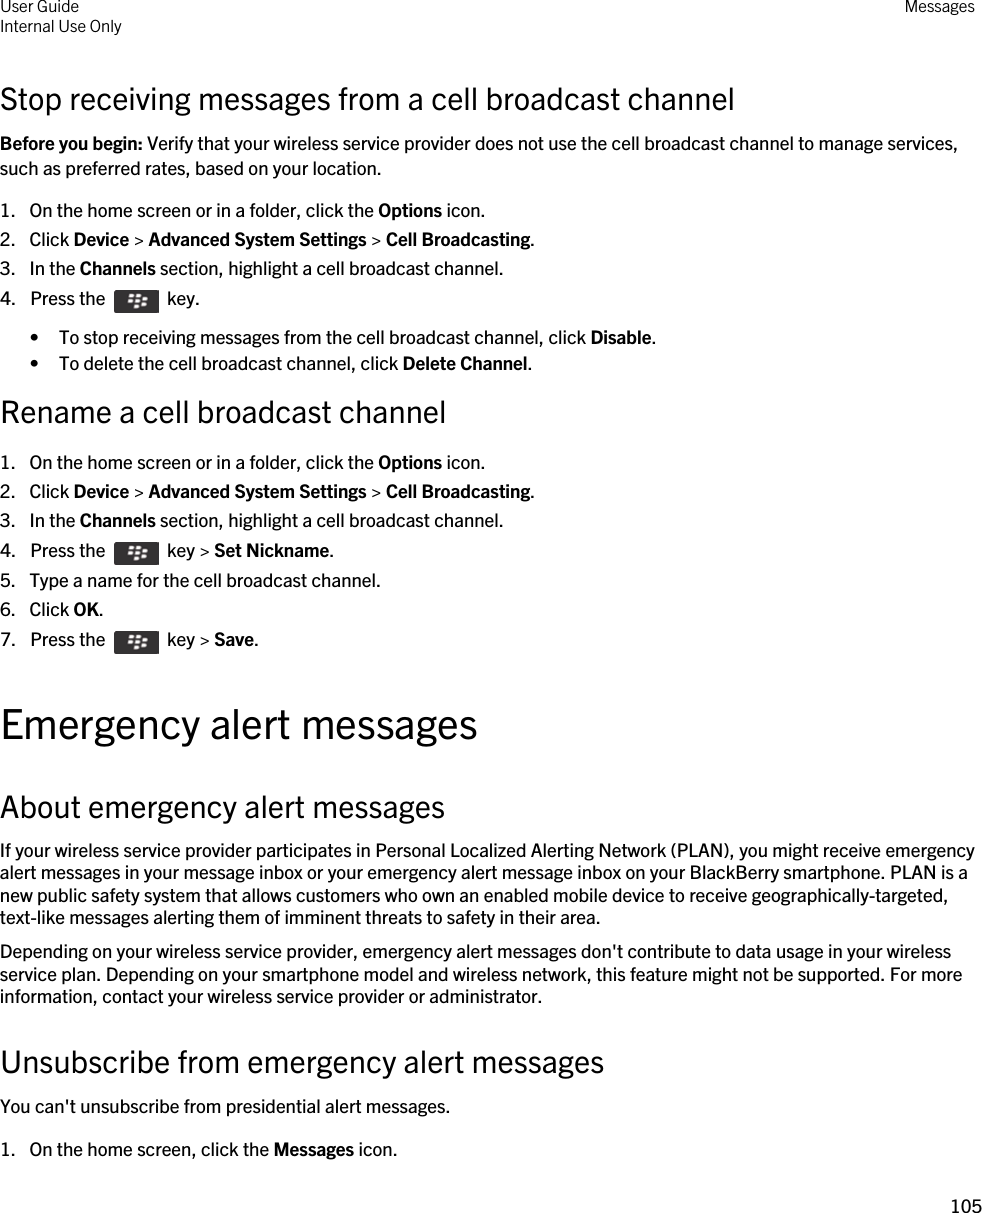 Stop receiving messages from a cell broadcast channelBefore you begin: Verify that your wireless service provider does not use the cell broadcast channel to manage services, such as preferred rates, based on your location.1. On the home screen or in a folder, click the Options icon.2. Click Device &gt; Advanced System Settings &gt; Cell Broadcasting.3. In the Channels section, highlight a cell broadcast channel.4.  Press the    key. • To stop receiving messages from the cell broadcast channel, click Disable.• To delete the cell broadcast channel, click Delete Channel.Rename a cell broadcast channel1. On the home screen or in a folder, click the Options icon.2. Click Device &gt; Advanced System Settings &gt; Cell Broadcasting.3. In the Channels section, highlight a cell broadcast channel.4.  Press the    key &gt; Set Nickname.5. Type a name for the cell broadcast channel.6. Click OK.7.  Press the    key &gt; Save. Emergency alert messagesAbout emergency alert messagesIf your wireless service provider participates in Personal Localized Alerting Network (PLAN), you might receive emergency alert messages in your message inbox or your emergency alert message inbox on your BlackBerry smartphone. PLAN is a new public safety system that allows customers who own an enabled mobile device to receive geographically-targeted, text-like messages alerting them of imminent threats to safety in their area.Depending on your wireless service provider, emergency alert messages don&apos;t contribute to data usage in your wireless service plan. Depending on your smartphone model and wireless network, this feature might not be supported. For more information, contact your wireless service provider or administrator.Unsubscribe from emergency alert messagesYou can&apos;t unsubscribe from presidential alert messages.1. On the home screen, click the Messages icon.User GuideInternal Use Only Messages105 